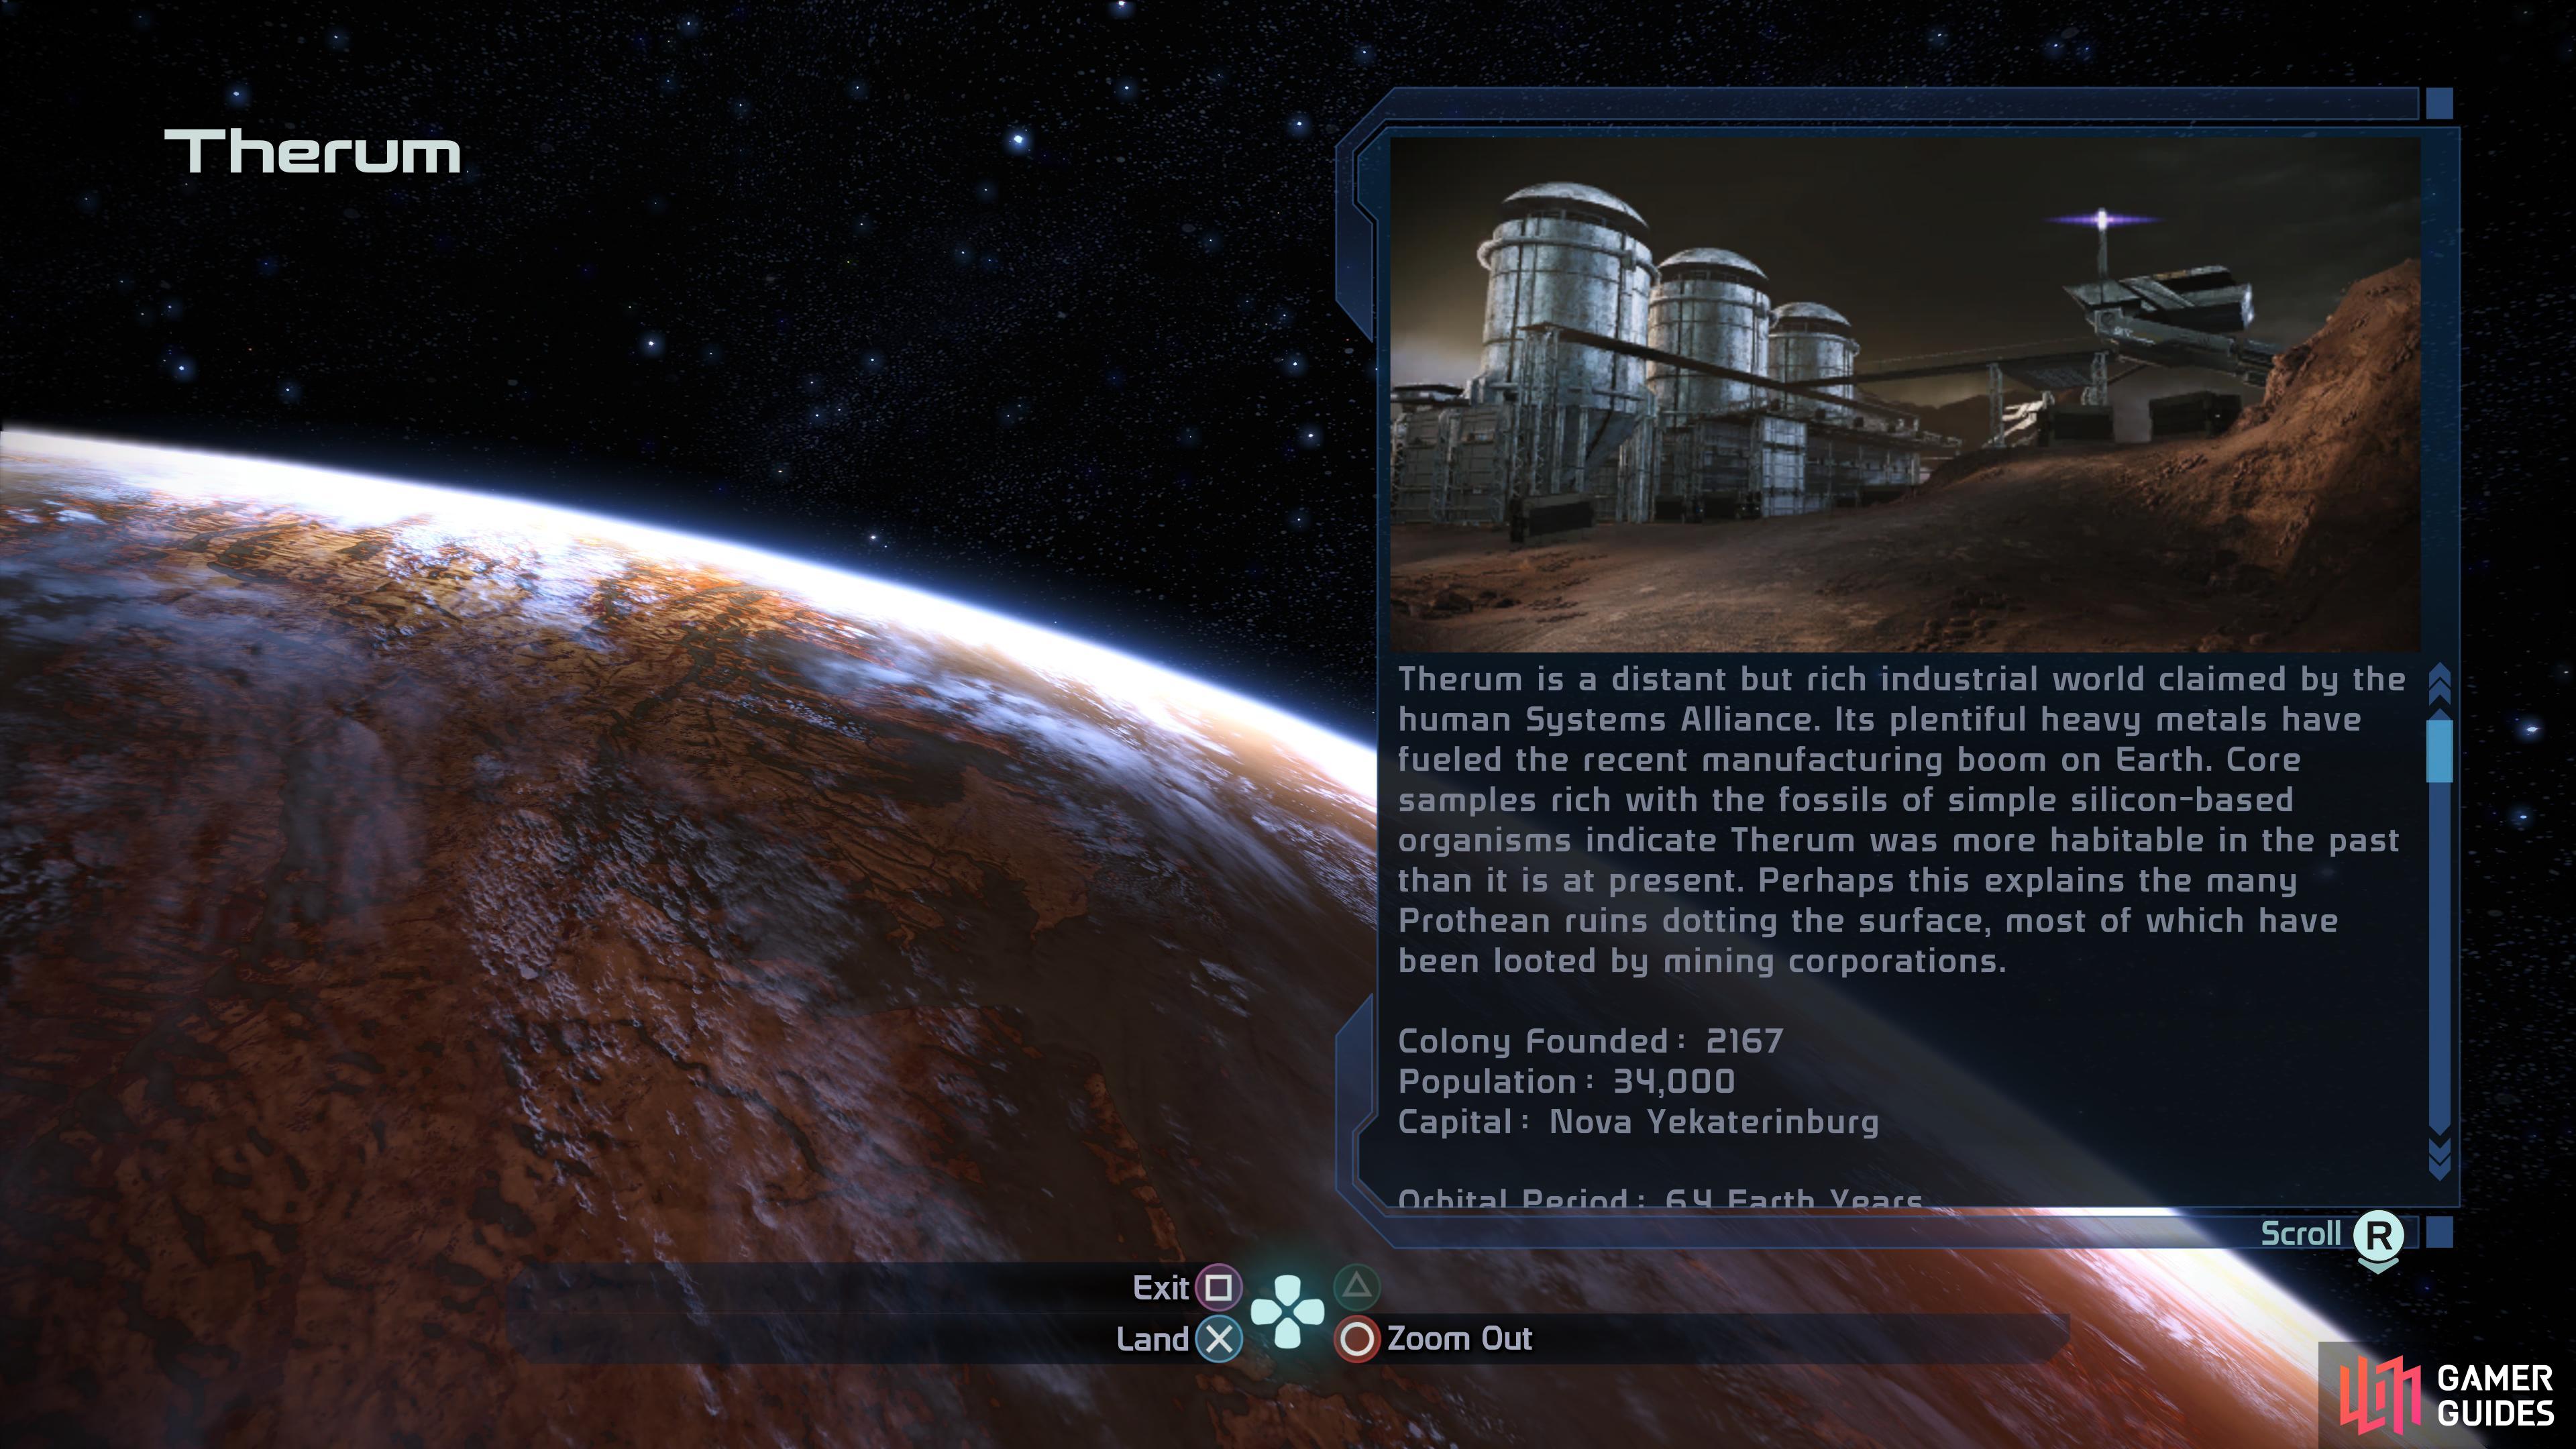 In the Knossos system you'll find Therum, where one of the core missions is located.